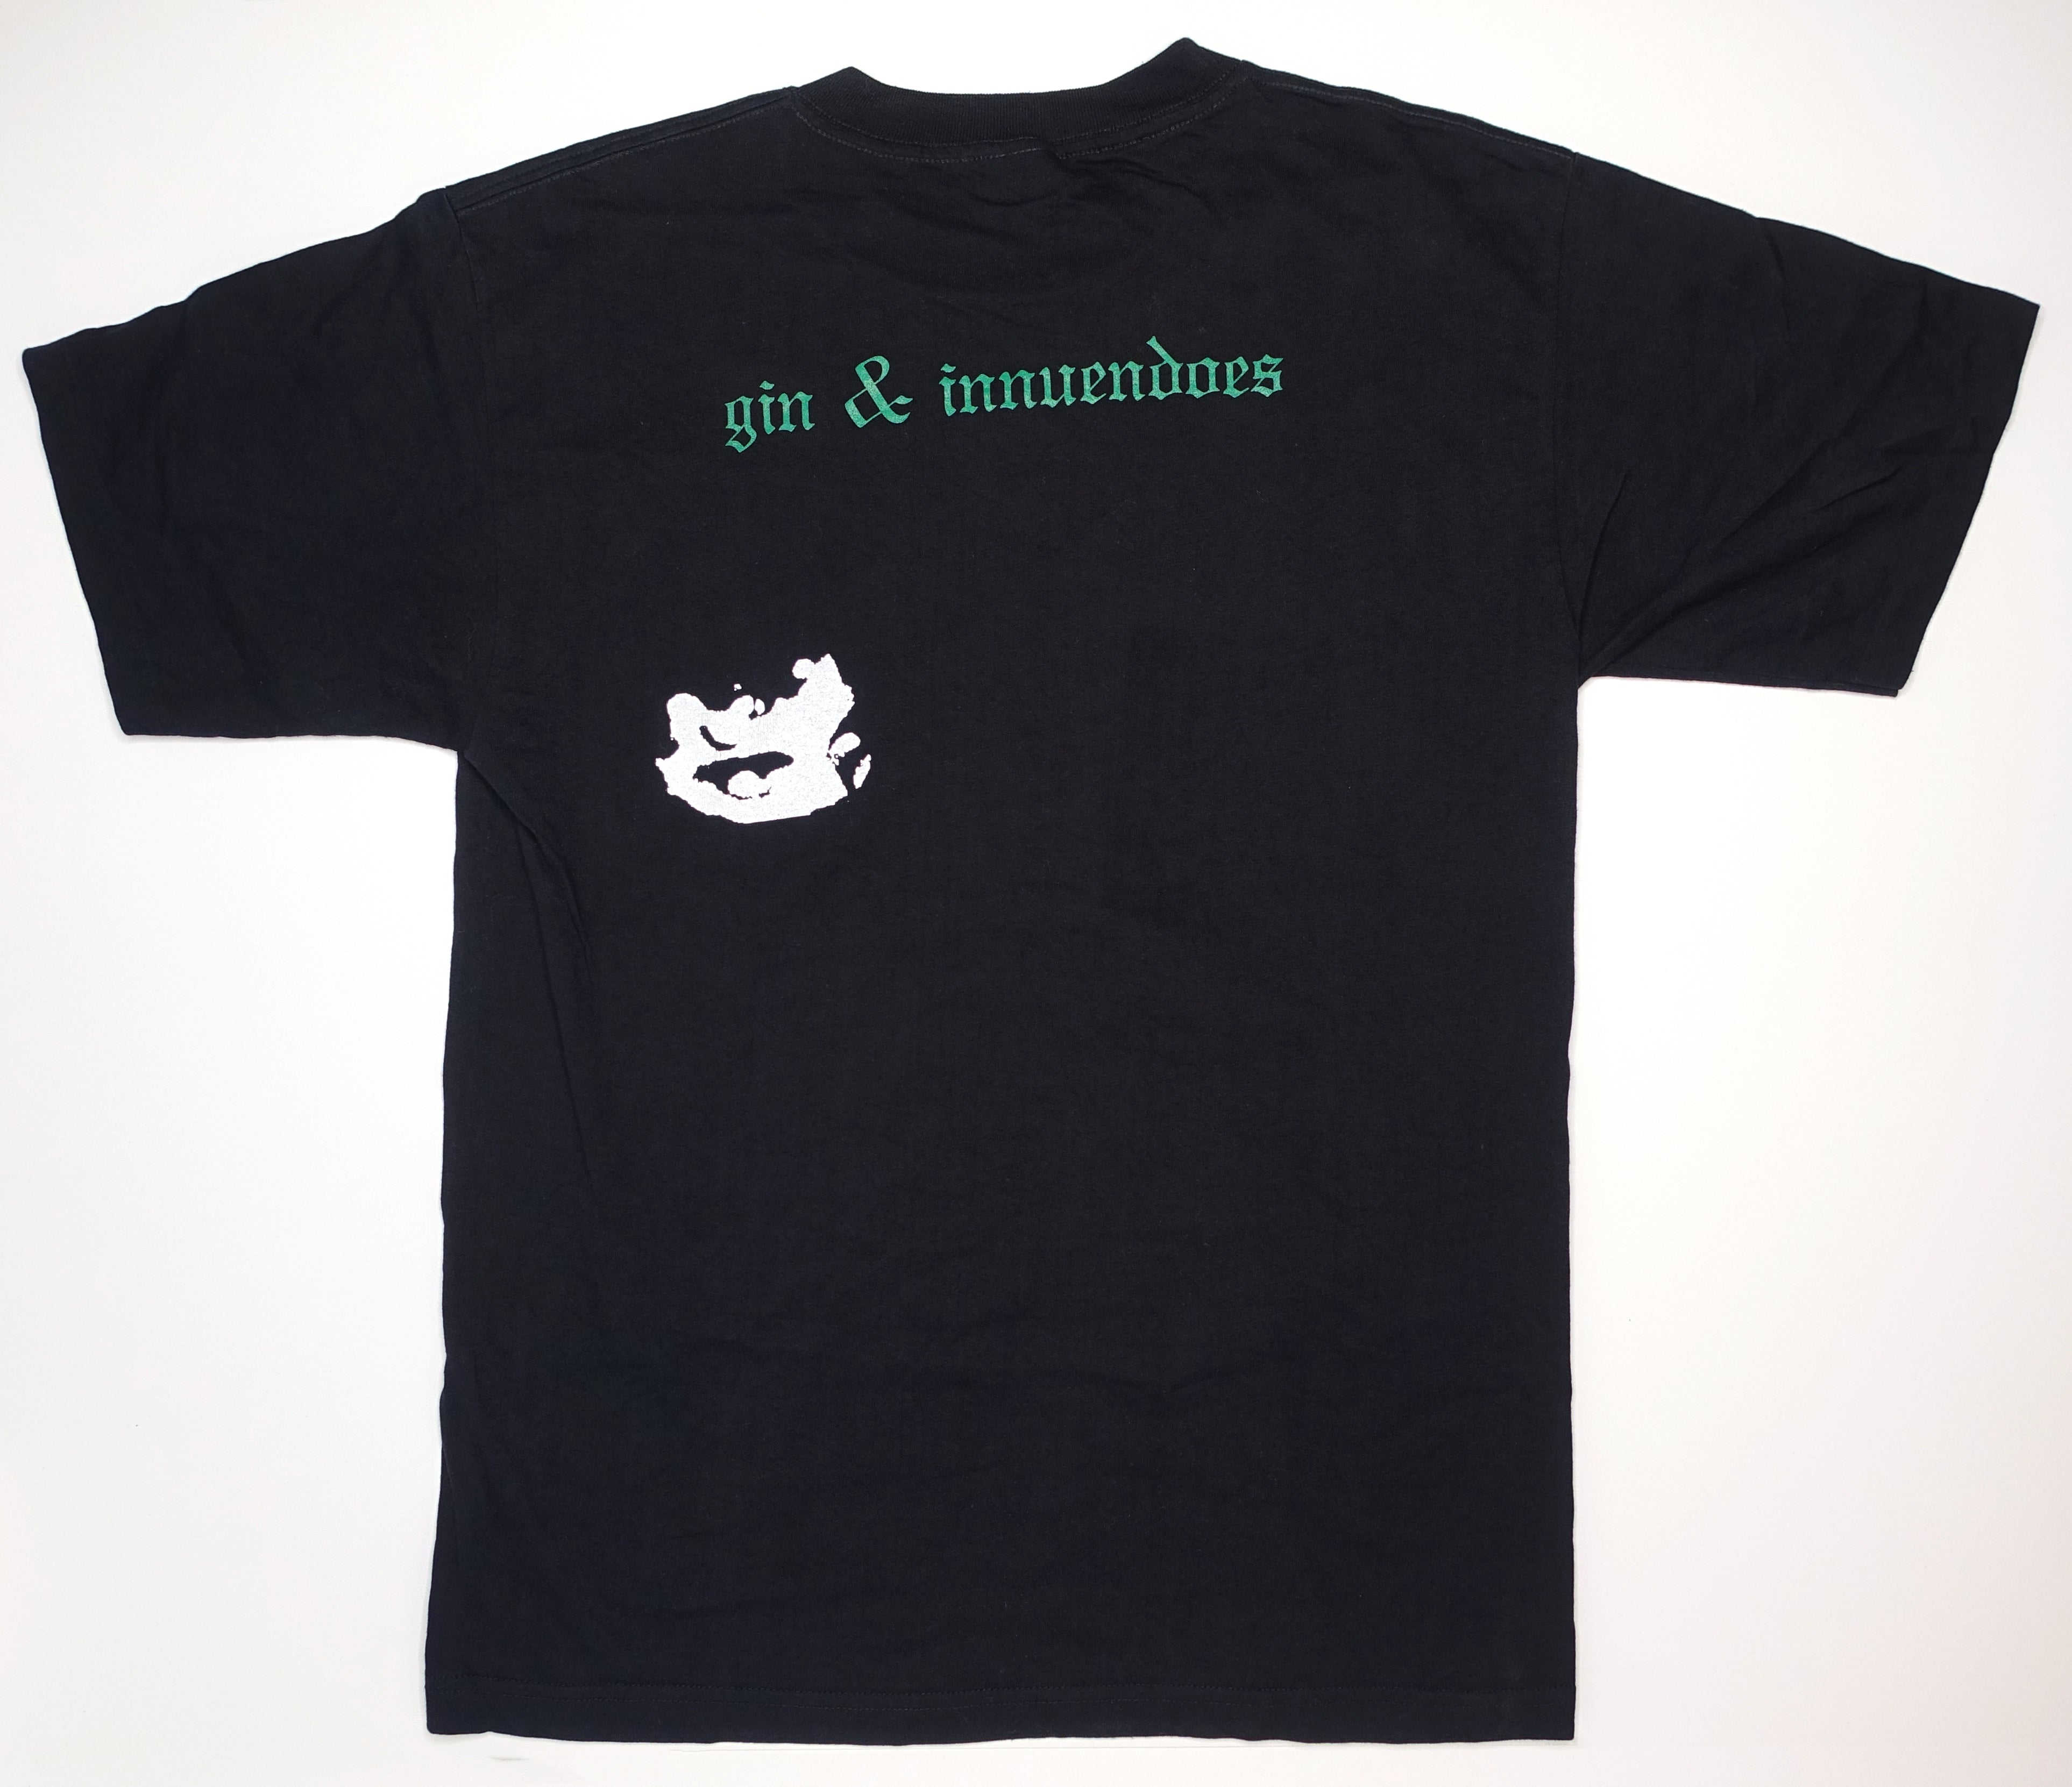 the Last - Gin & Innuendoes 1996 Tour Shirt Size Large